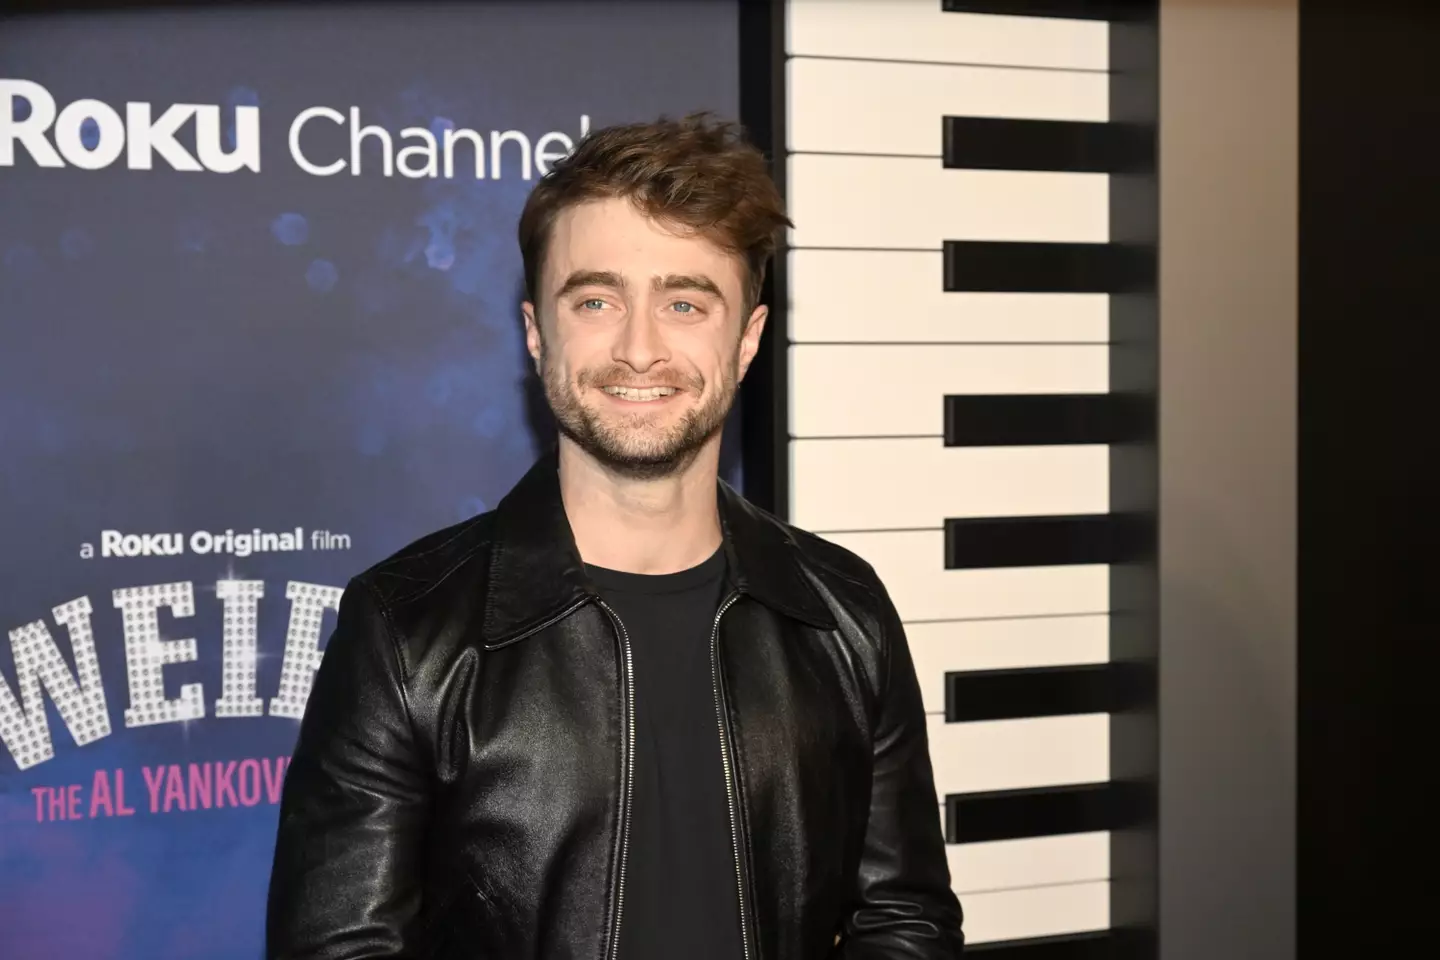 Daniel Radcliffe spoke out in defence of the transgender community. (Slaven Vlasic/Getty Images for The Roku Channel)